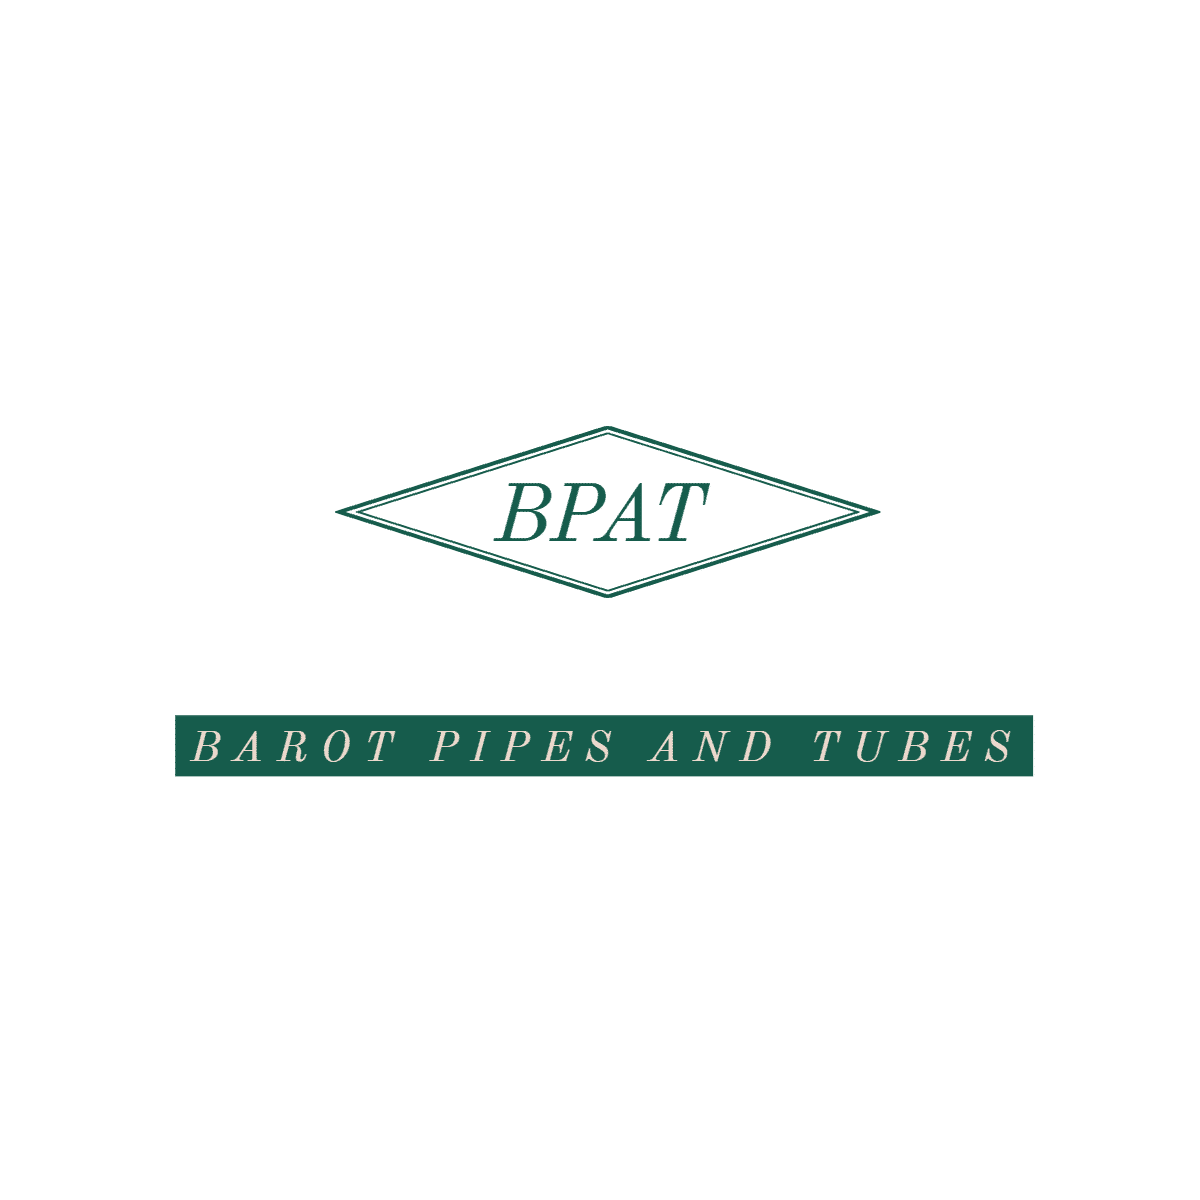 Barot Pipes And Tubes